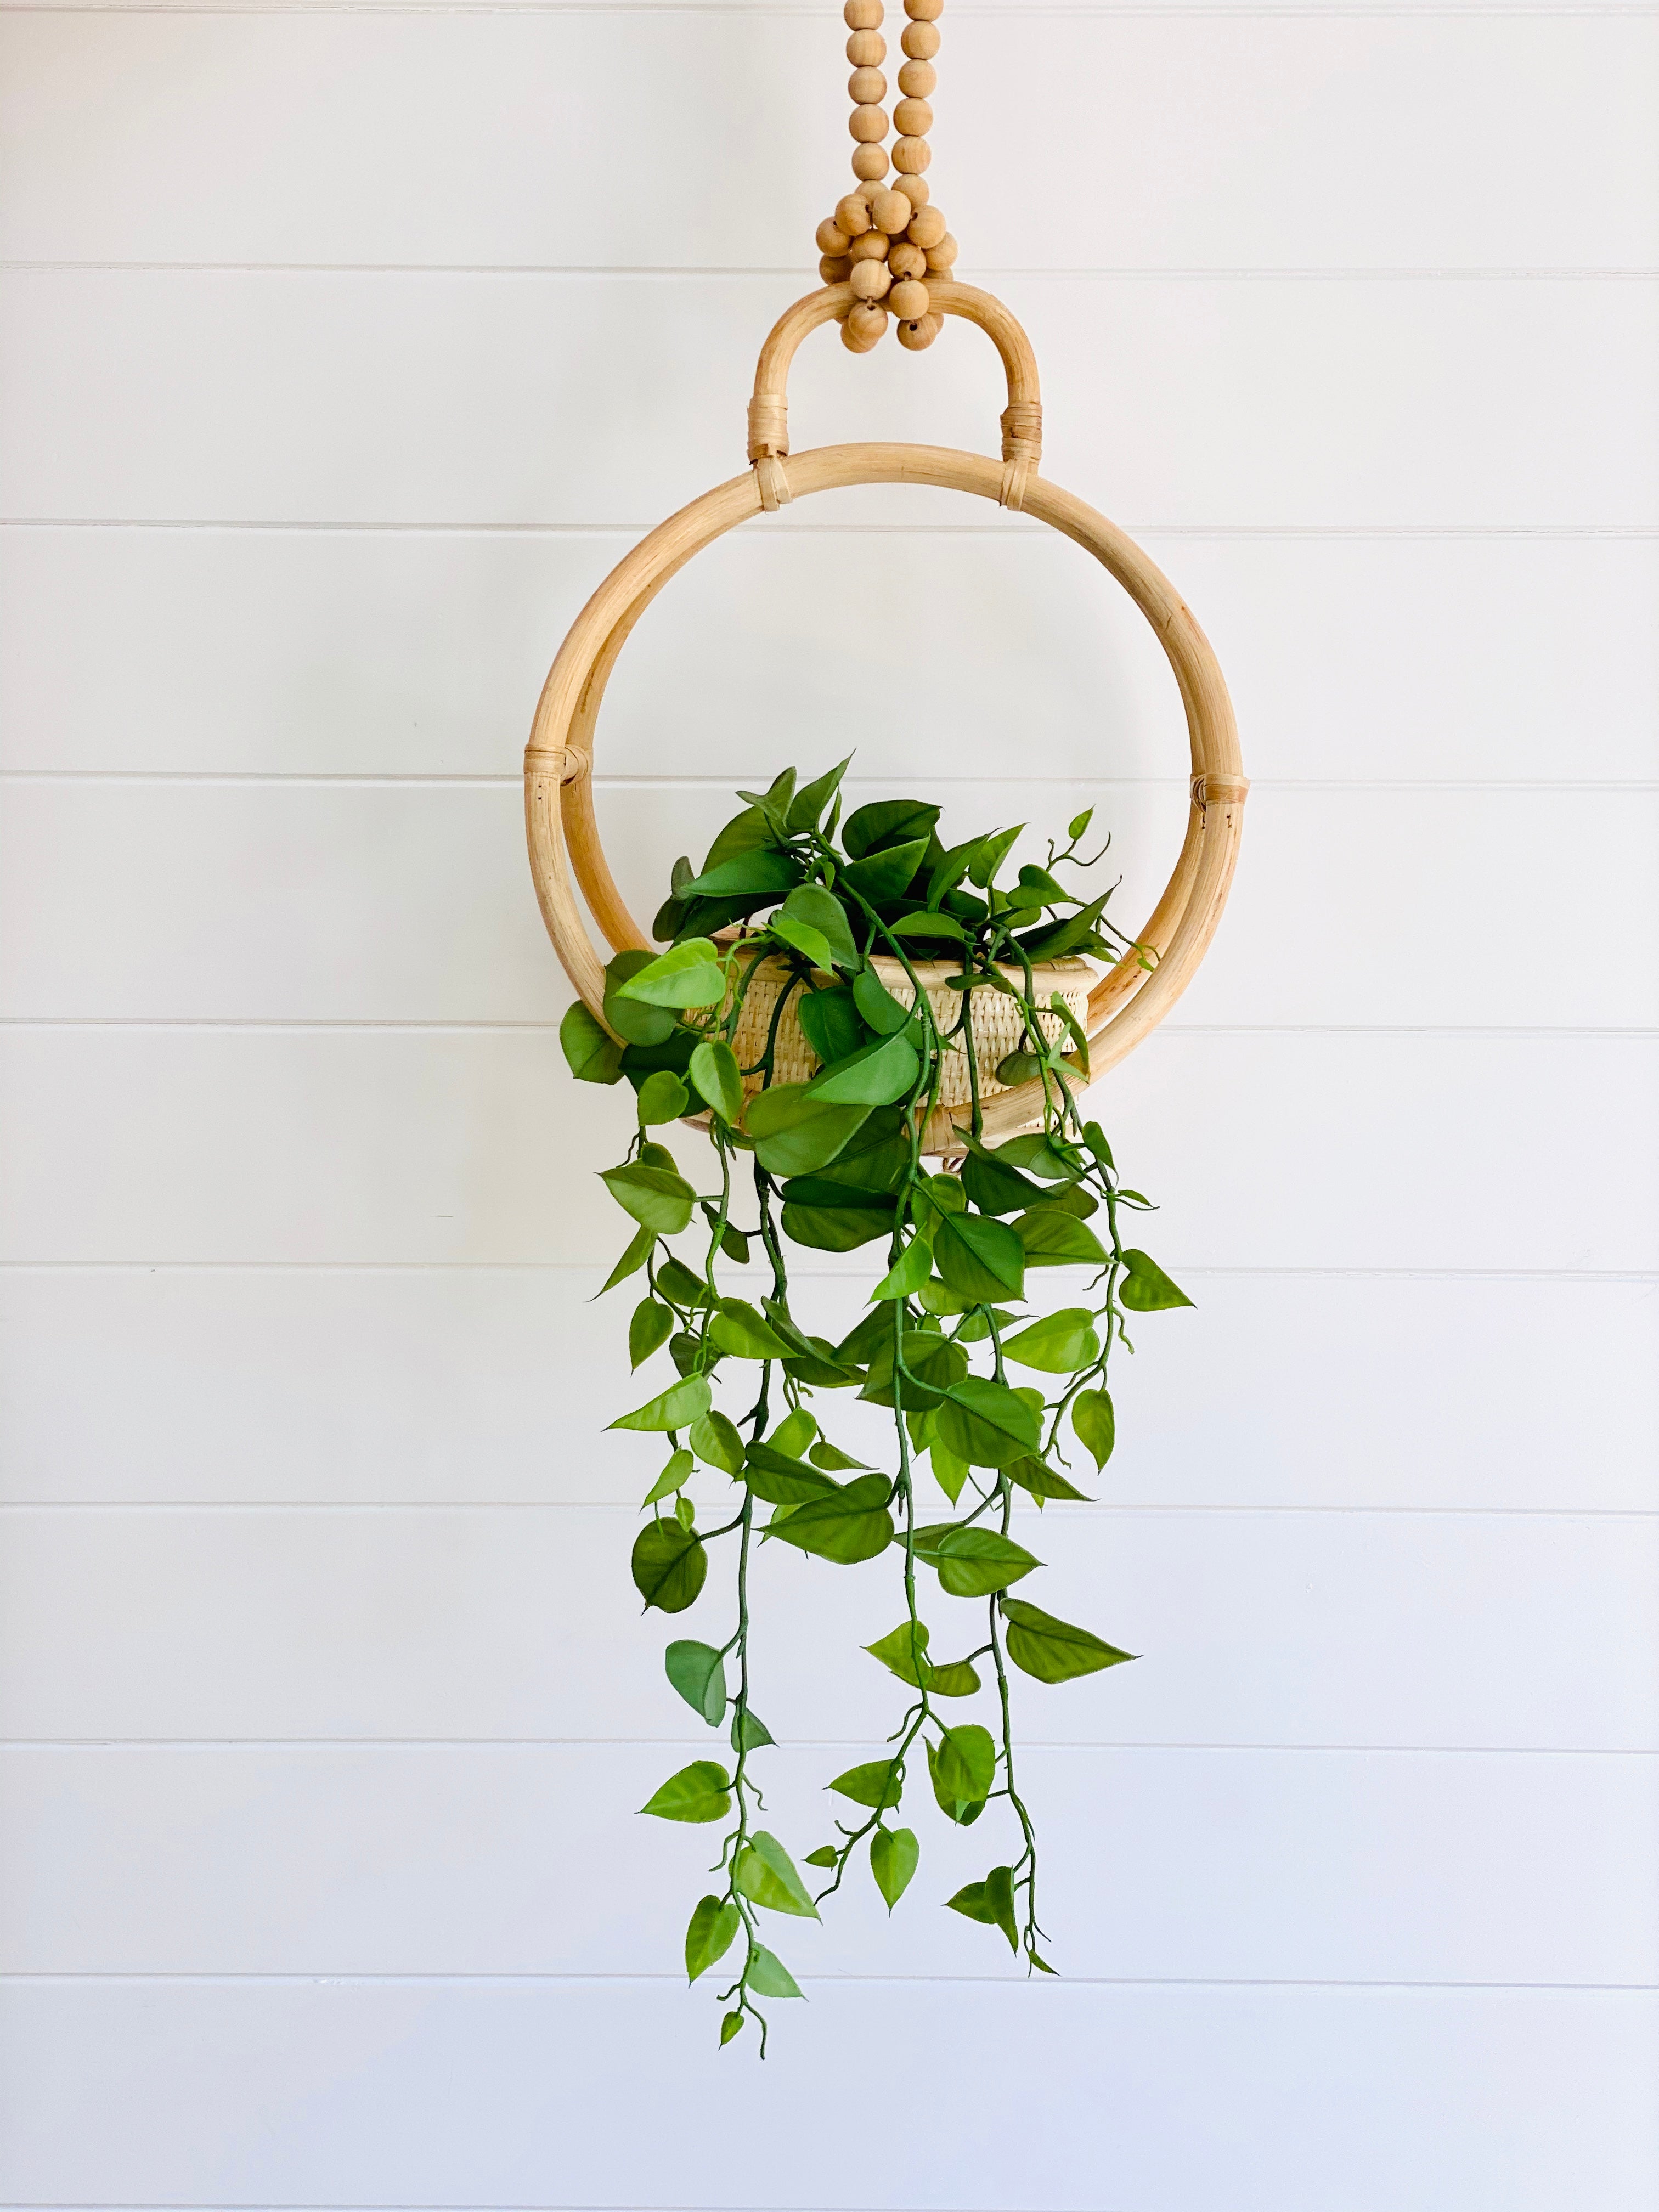 The Byron hanging planter